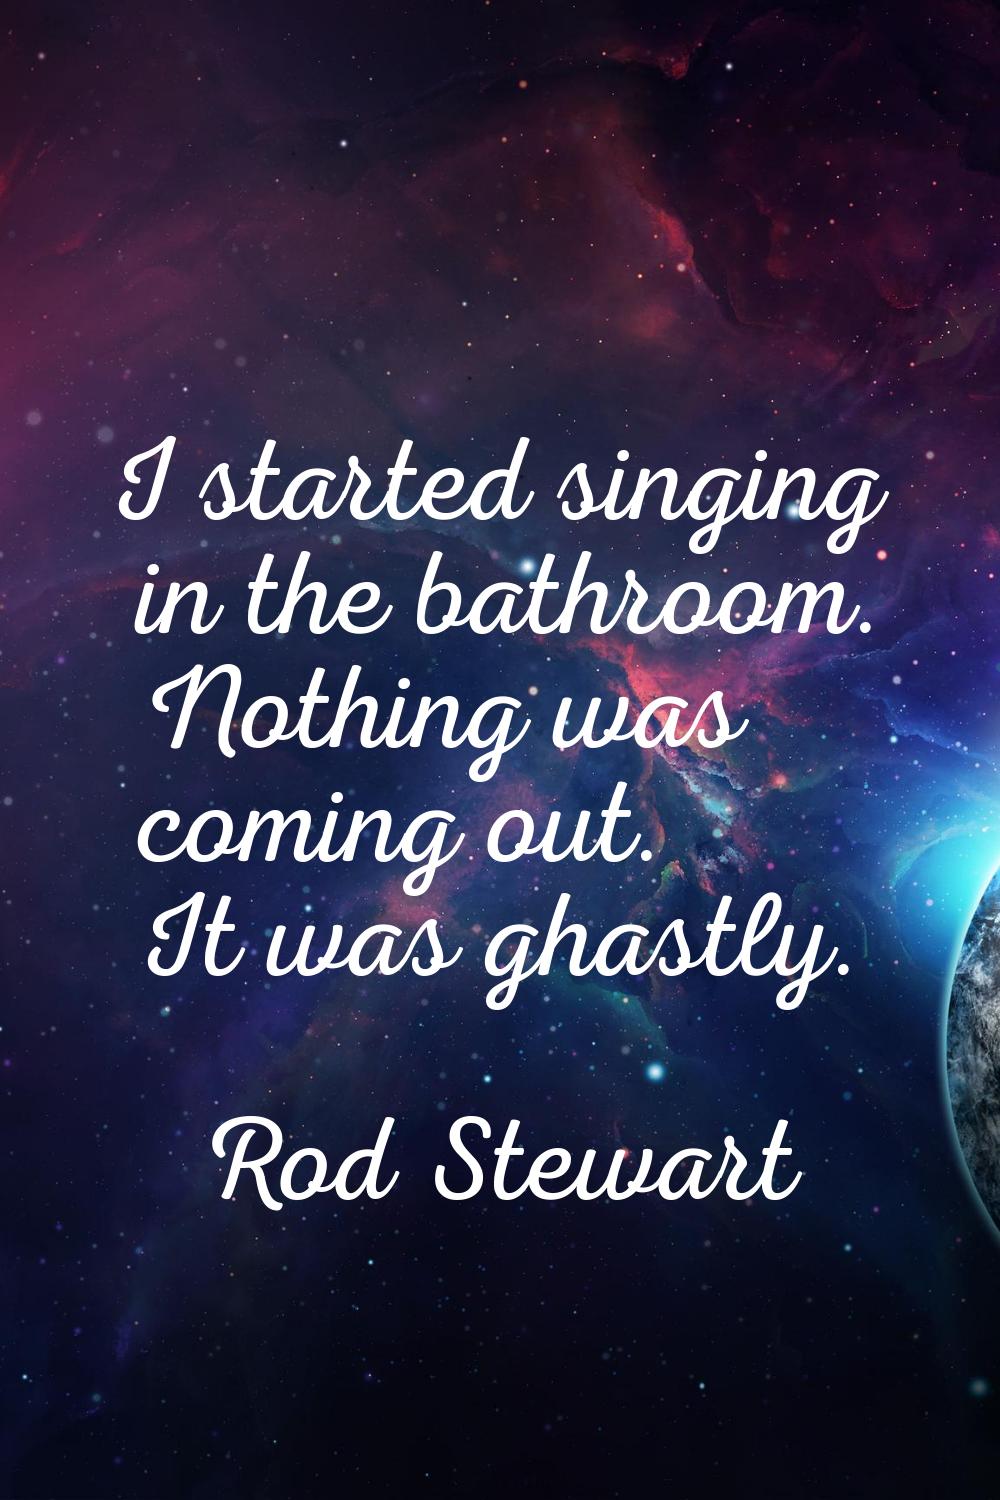 I started singing in the bathroom. Nothing was coming out. It was ghastly.